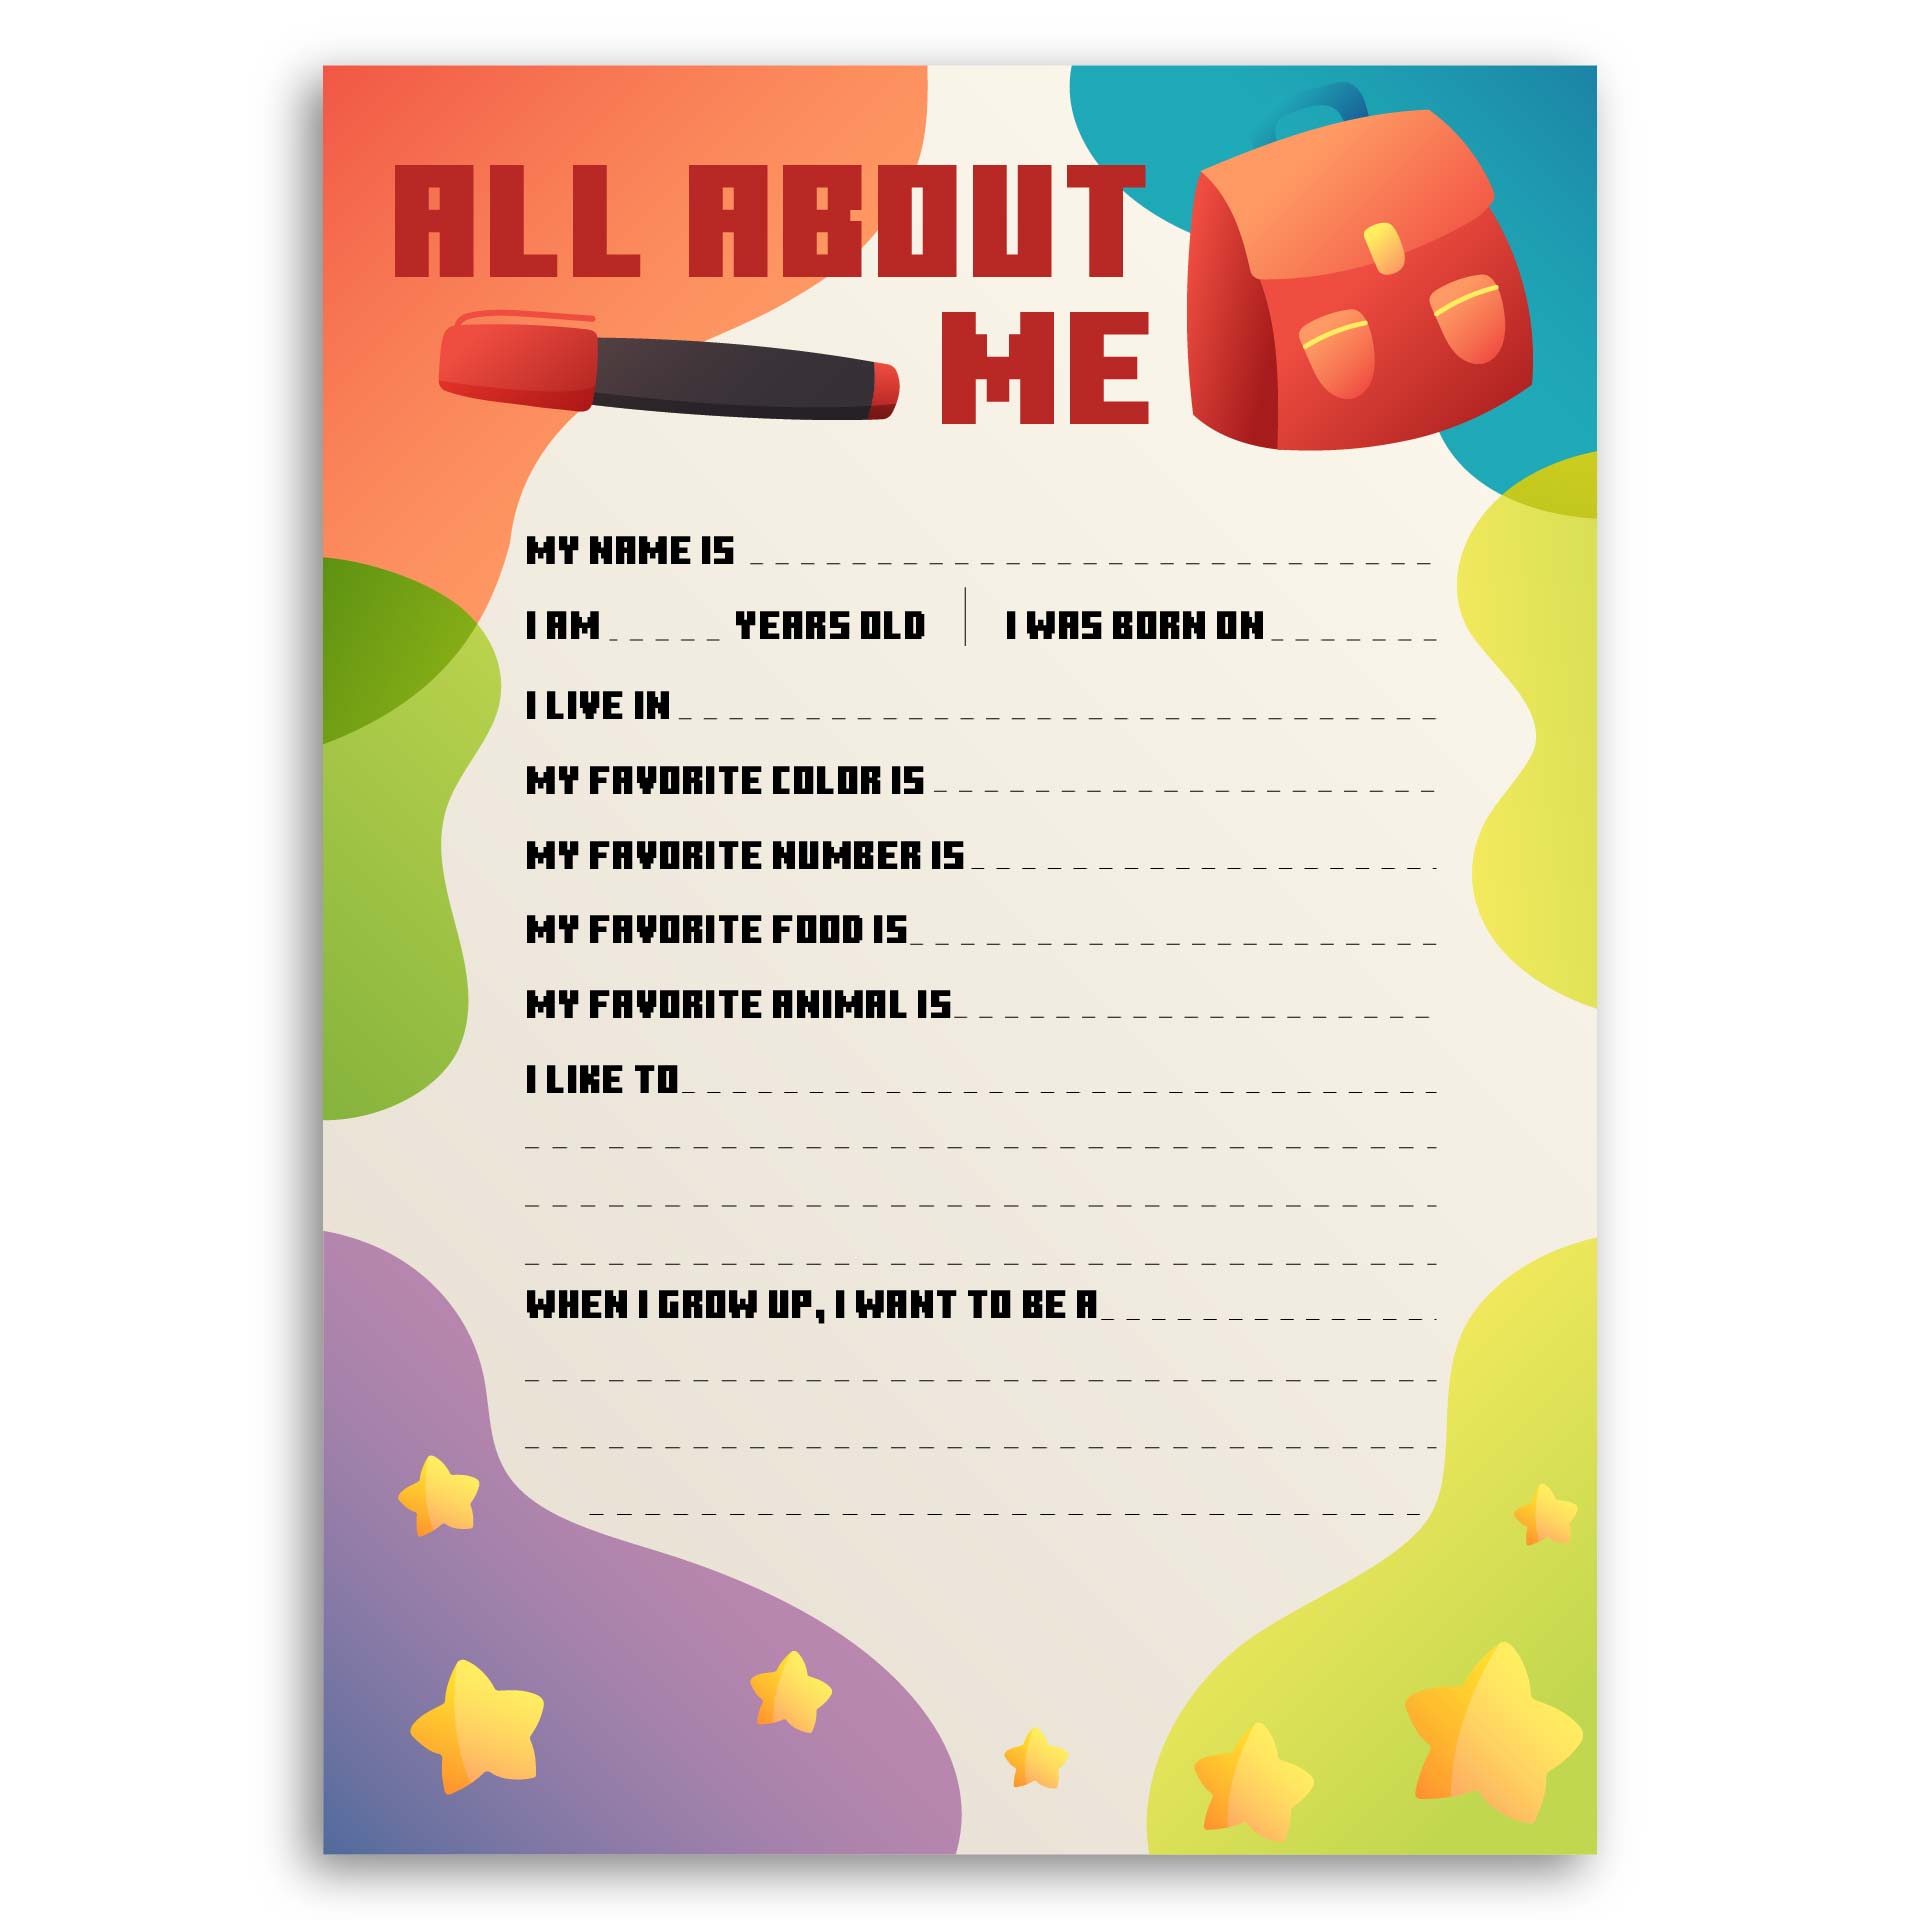 All About Me Worksheets Printables